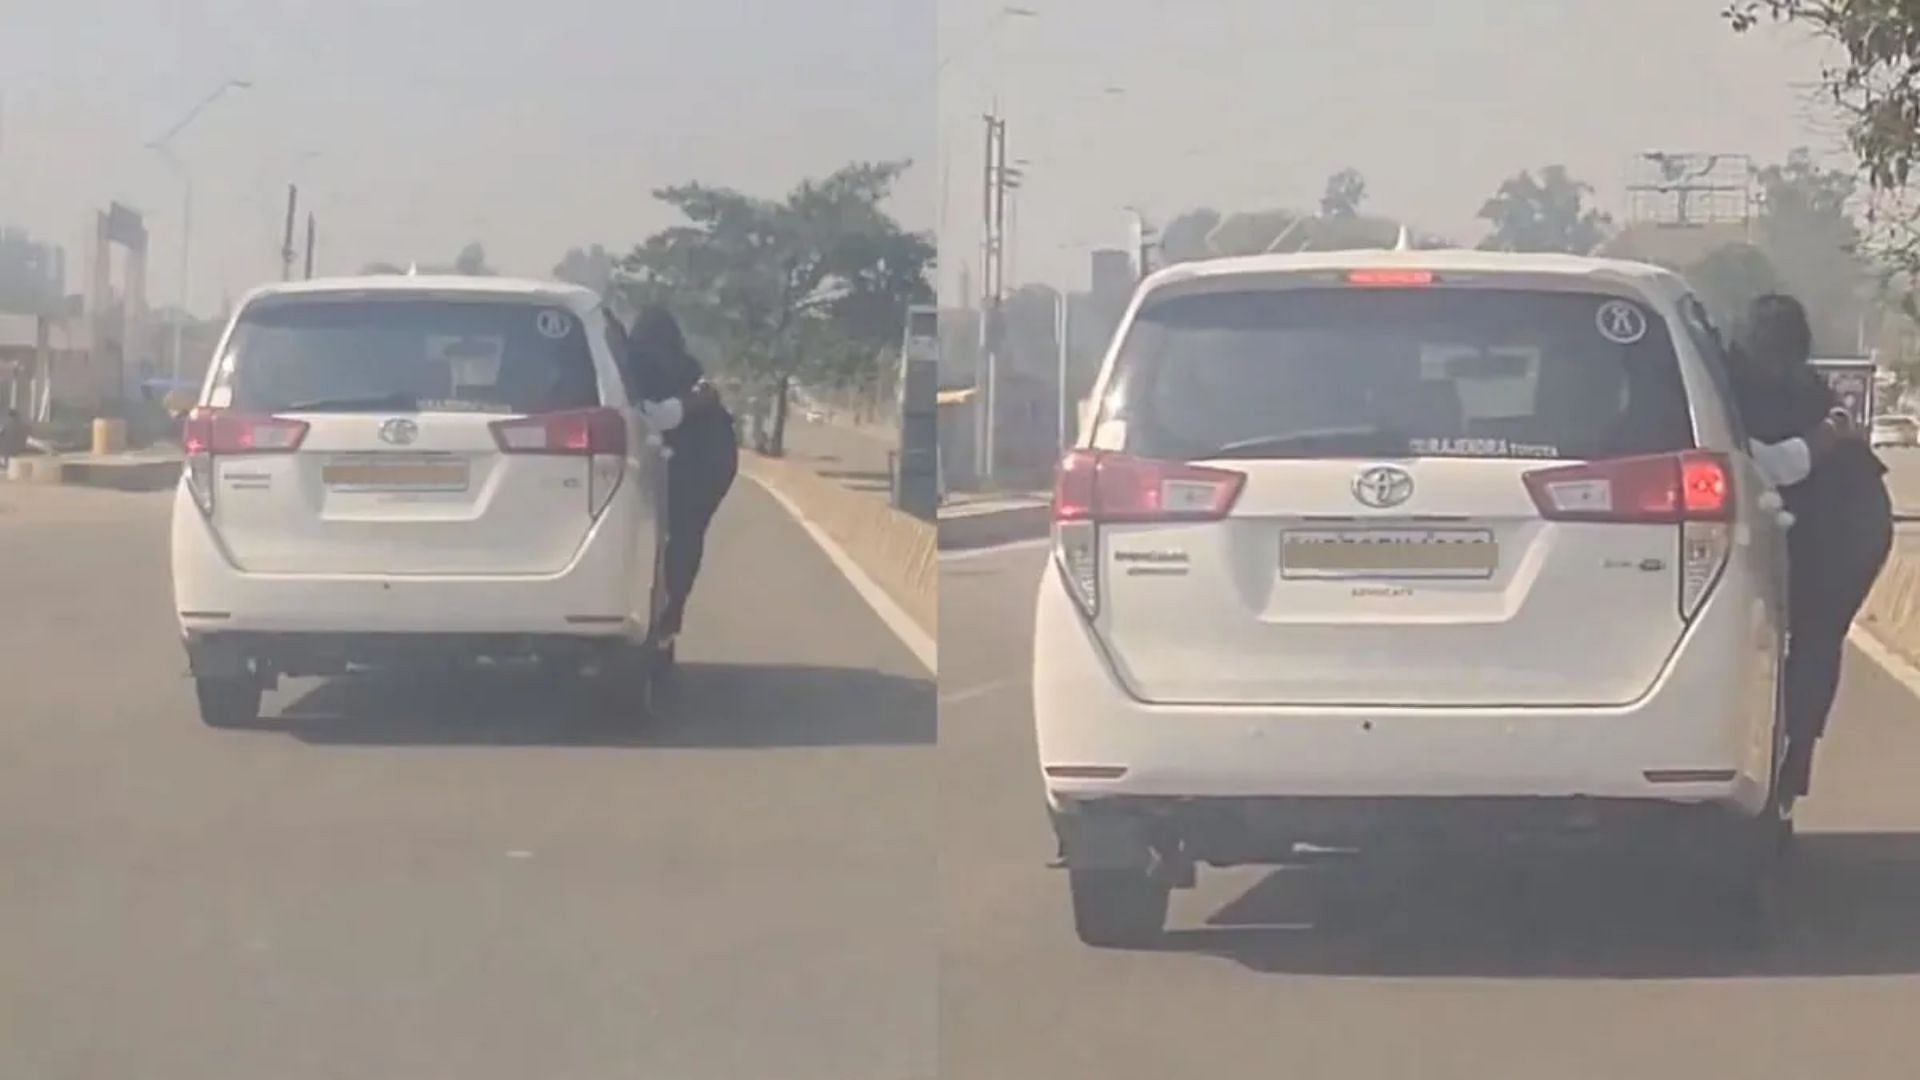 trending couple romance in moving car lucknow police cognizance viral video